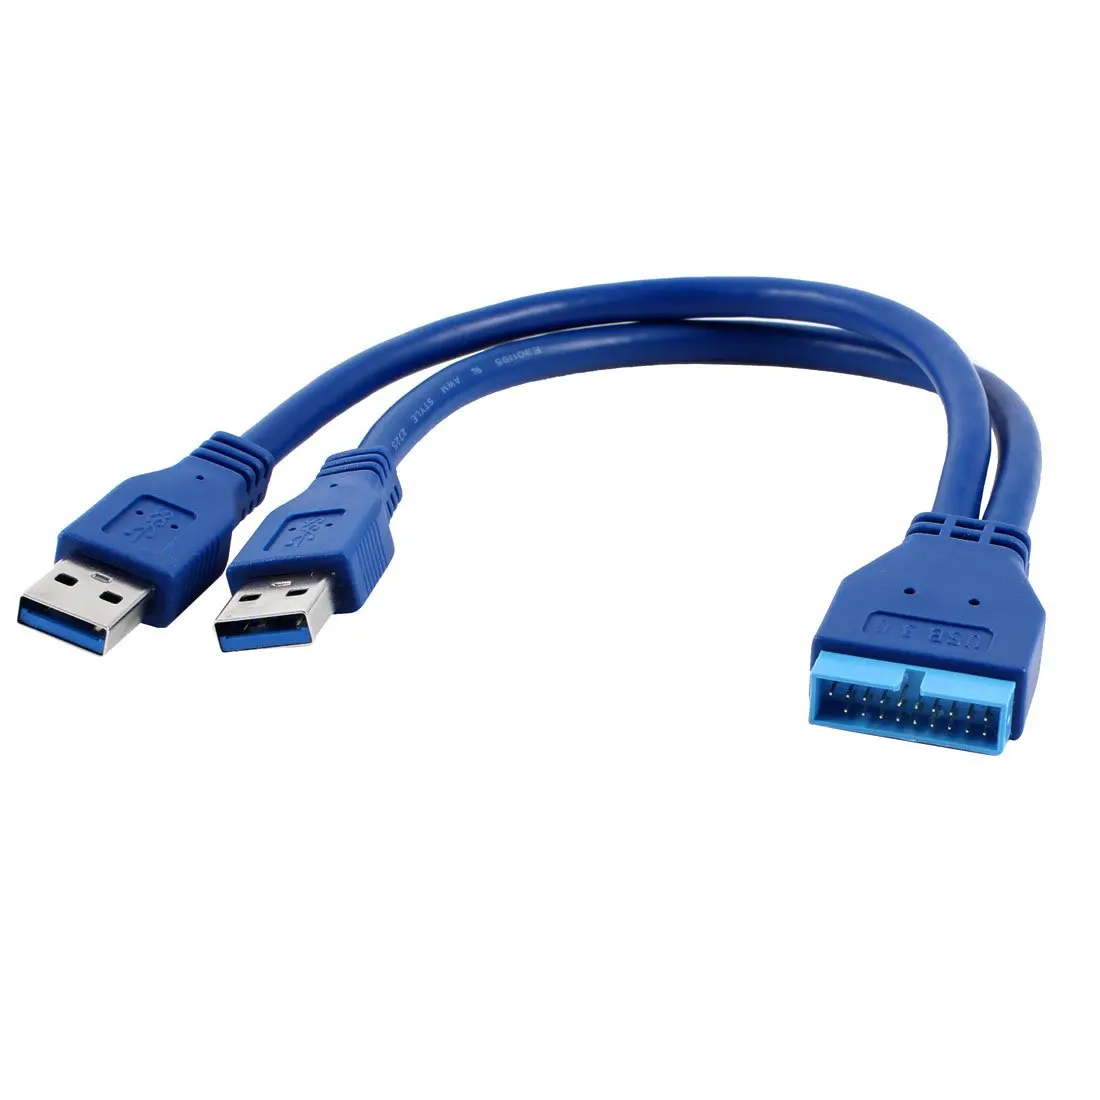 Mac Monitor Blue 3FT USB 3.0 Type A Male to Type A Male Cable for PC 